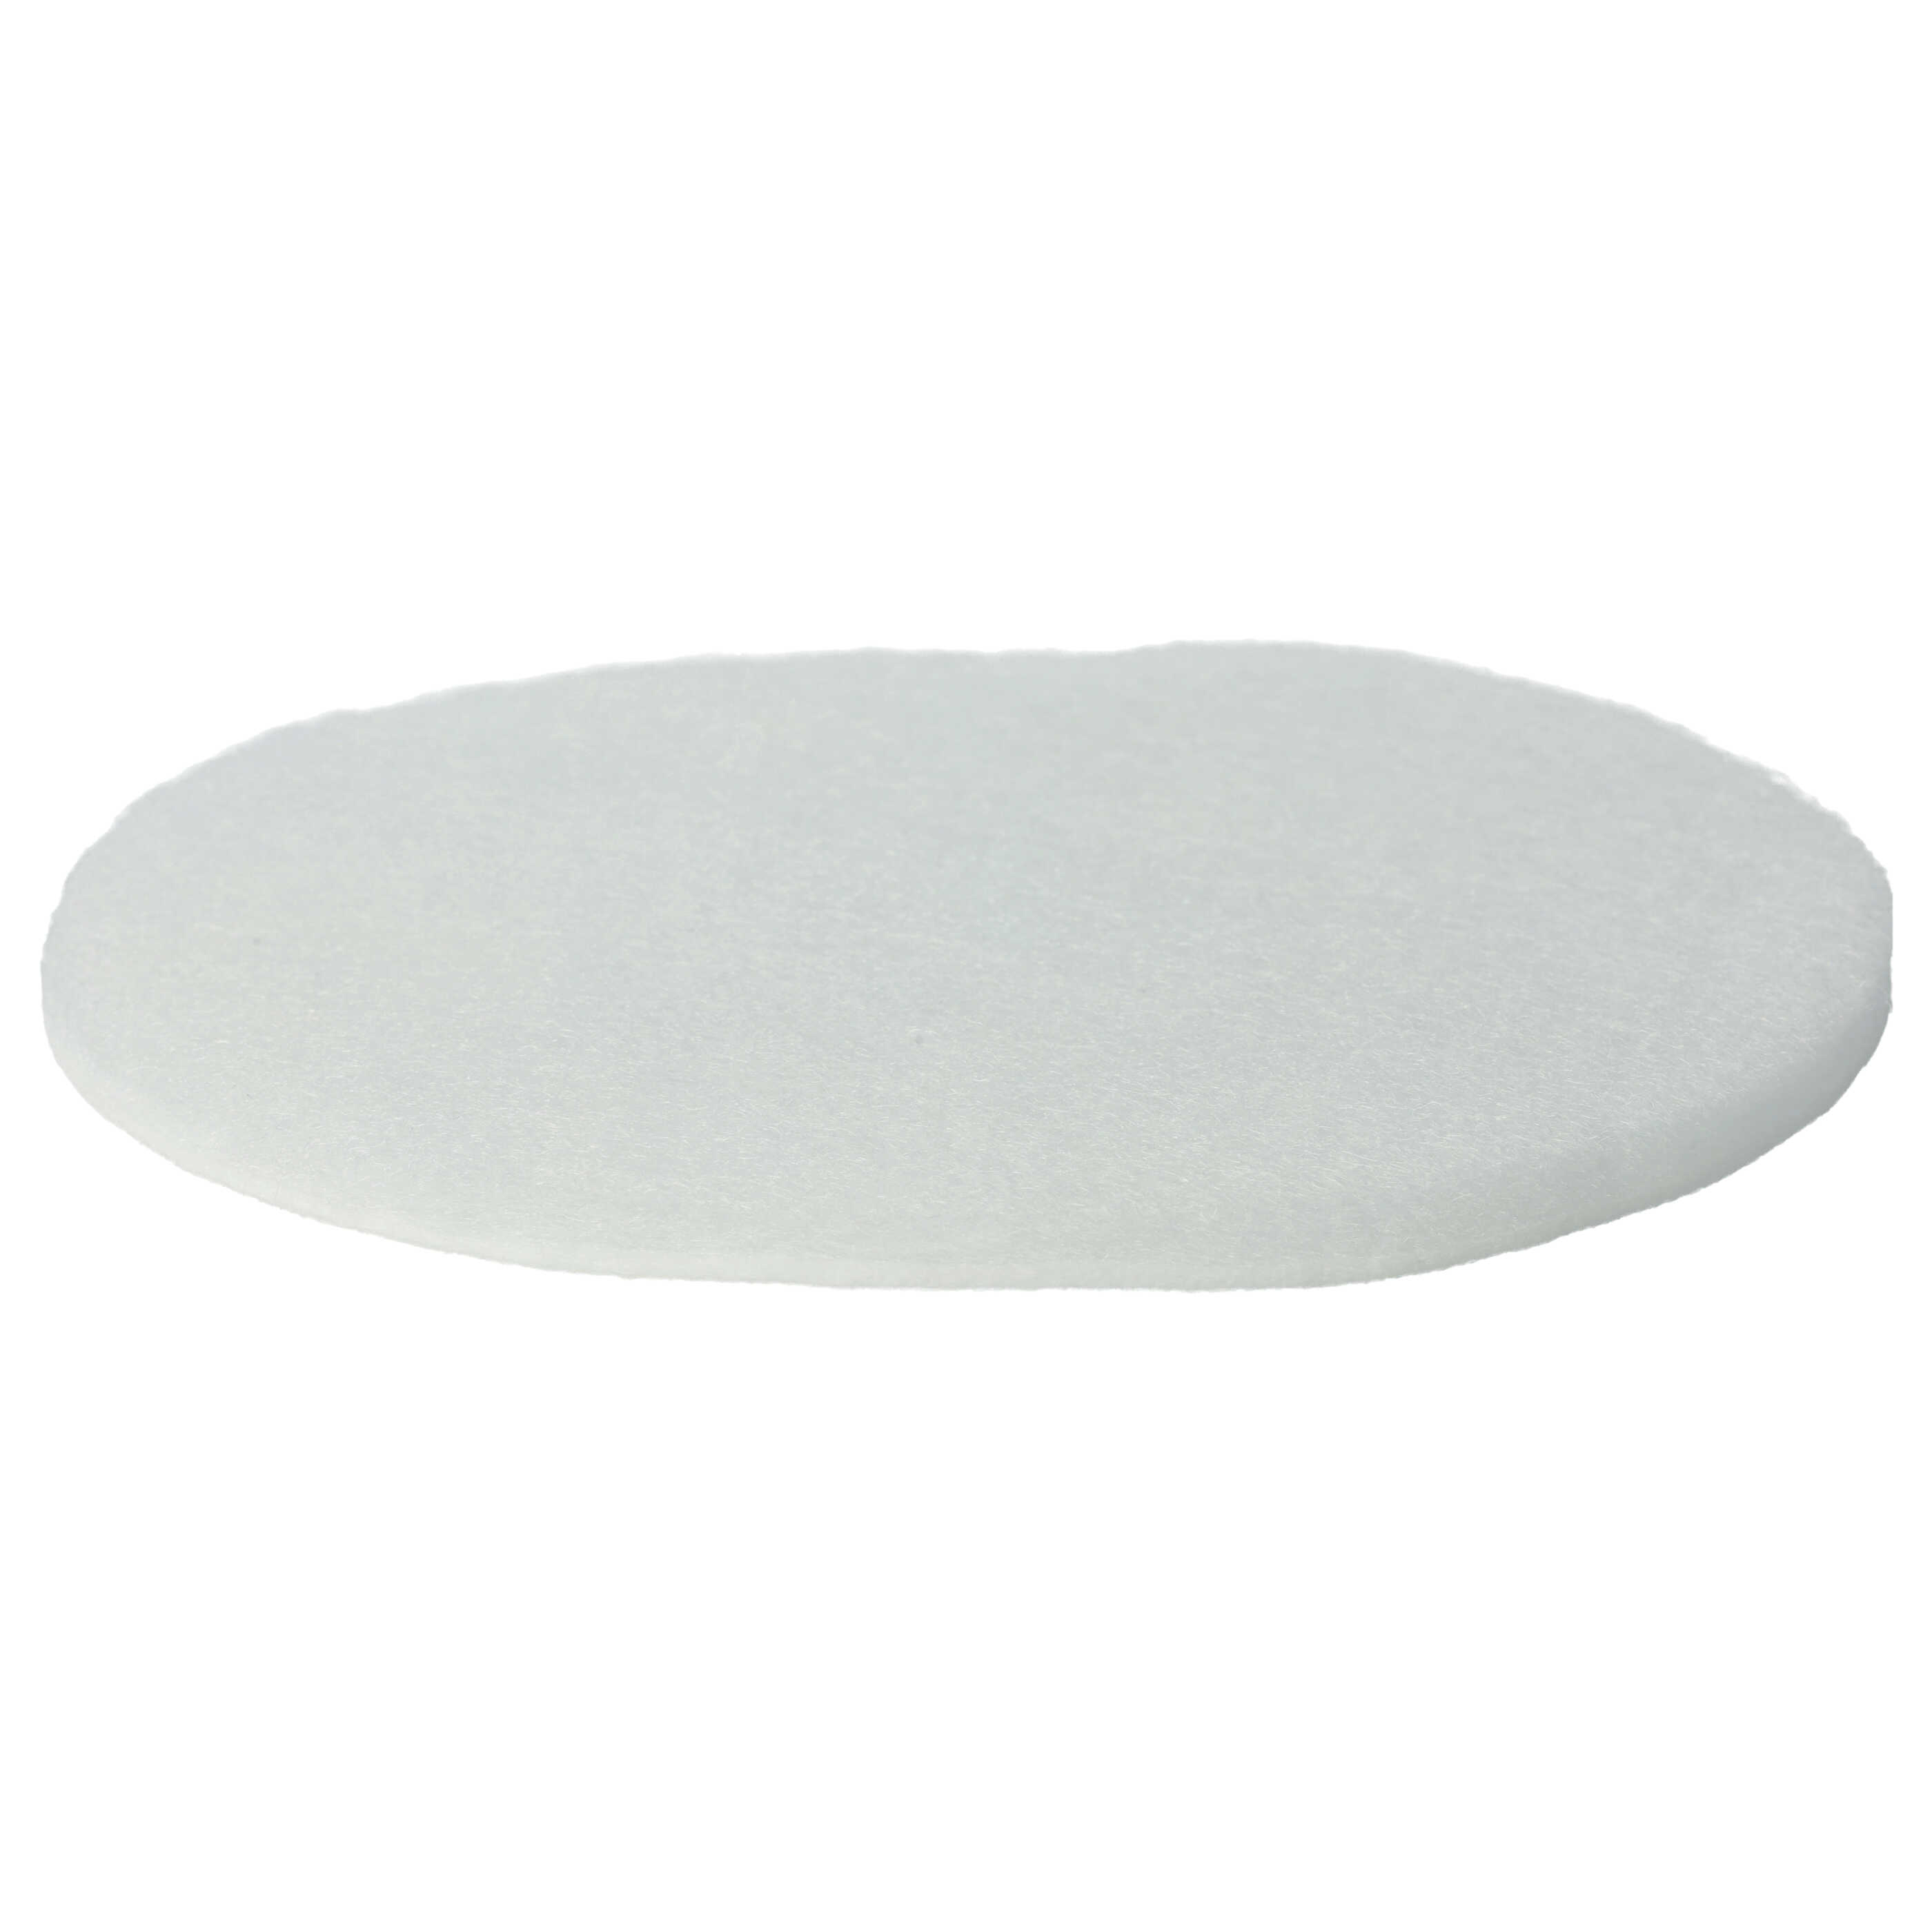 Filter Sleeve suitable for Dyson DC19 Vacuum Cleaner - Filter Protection White